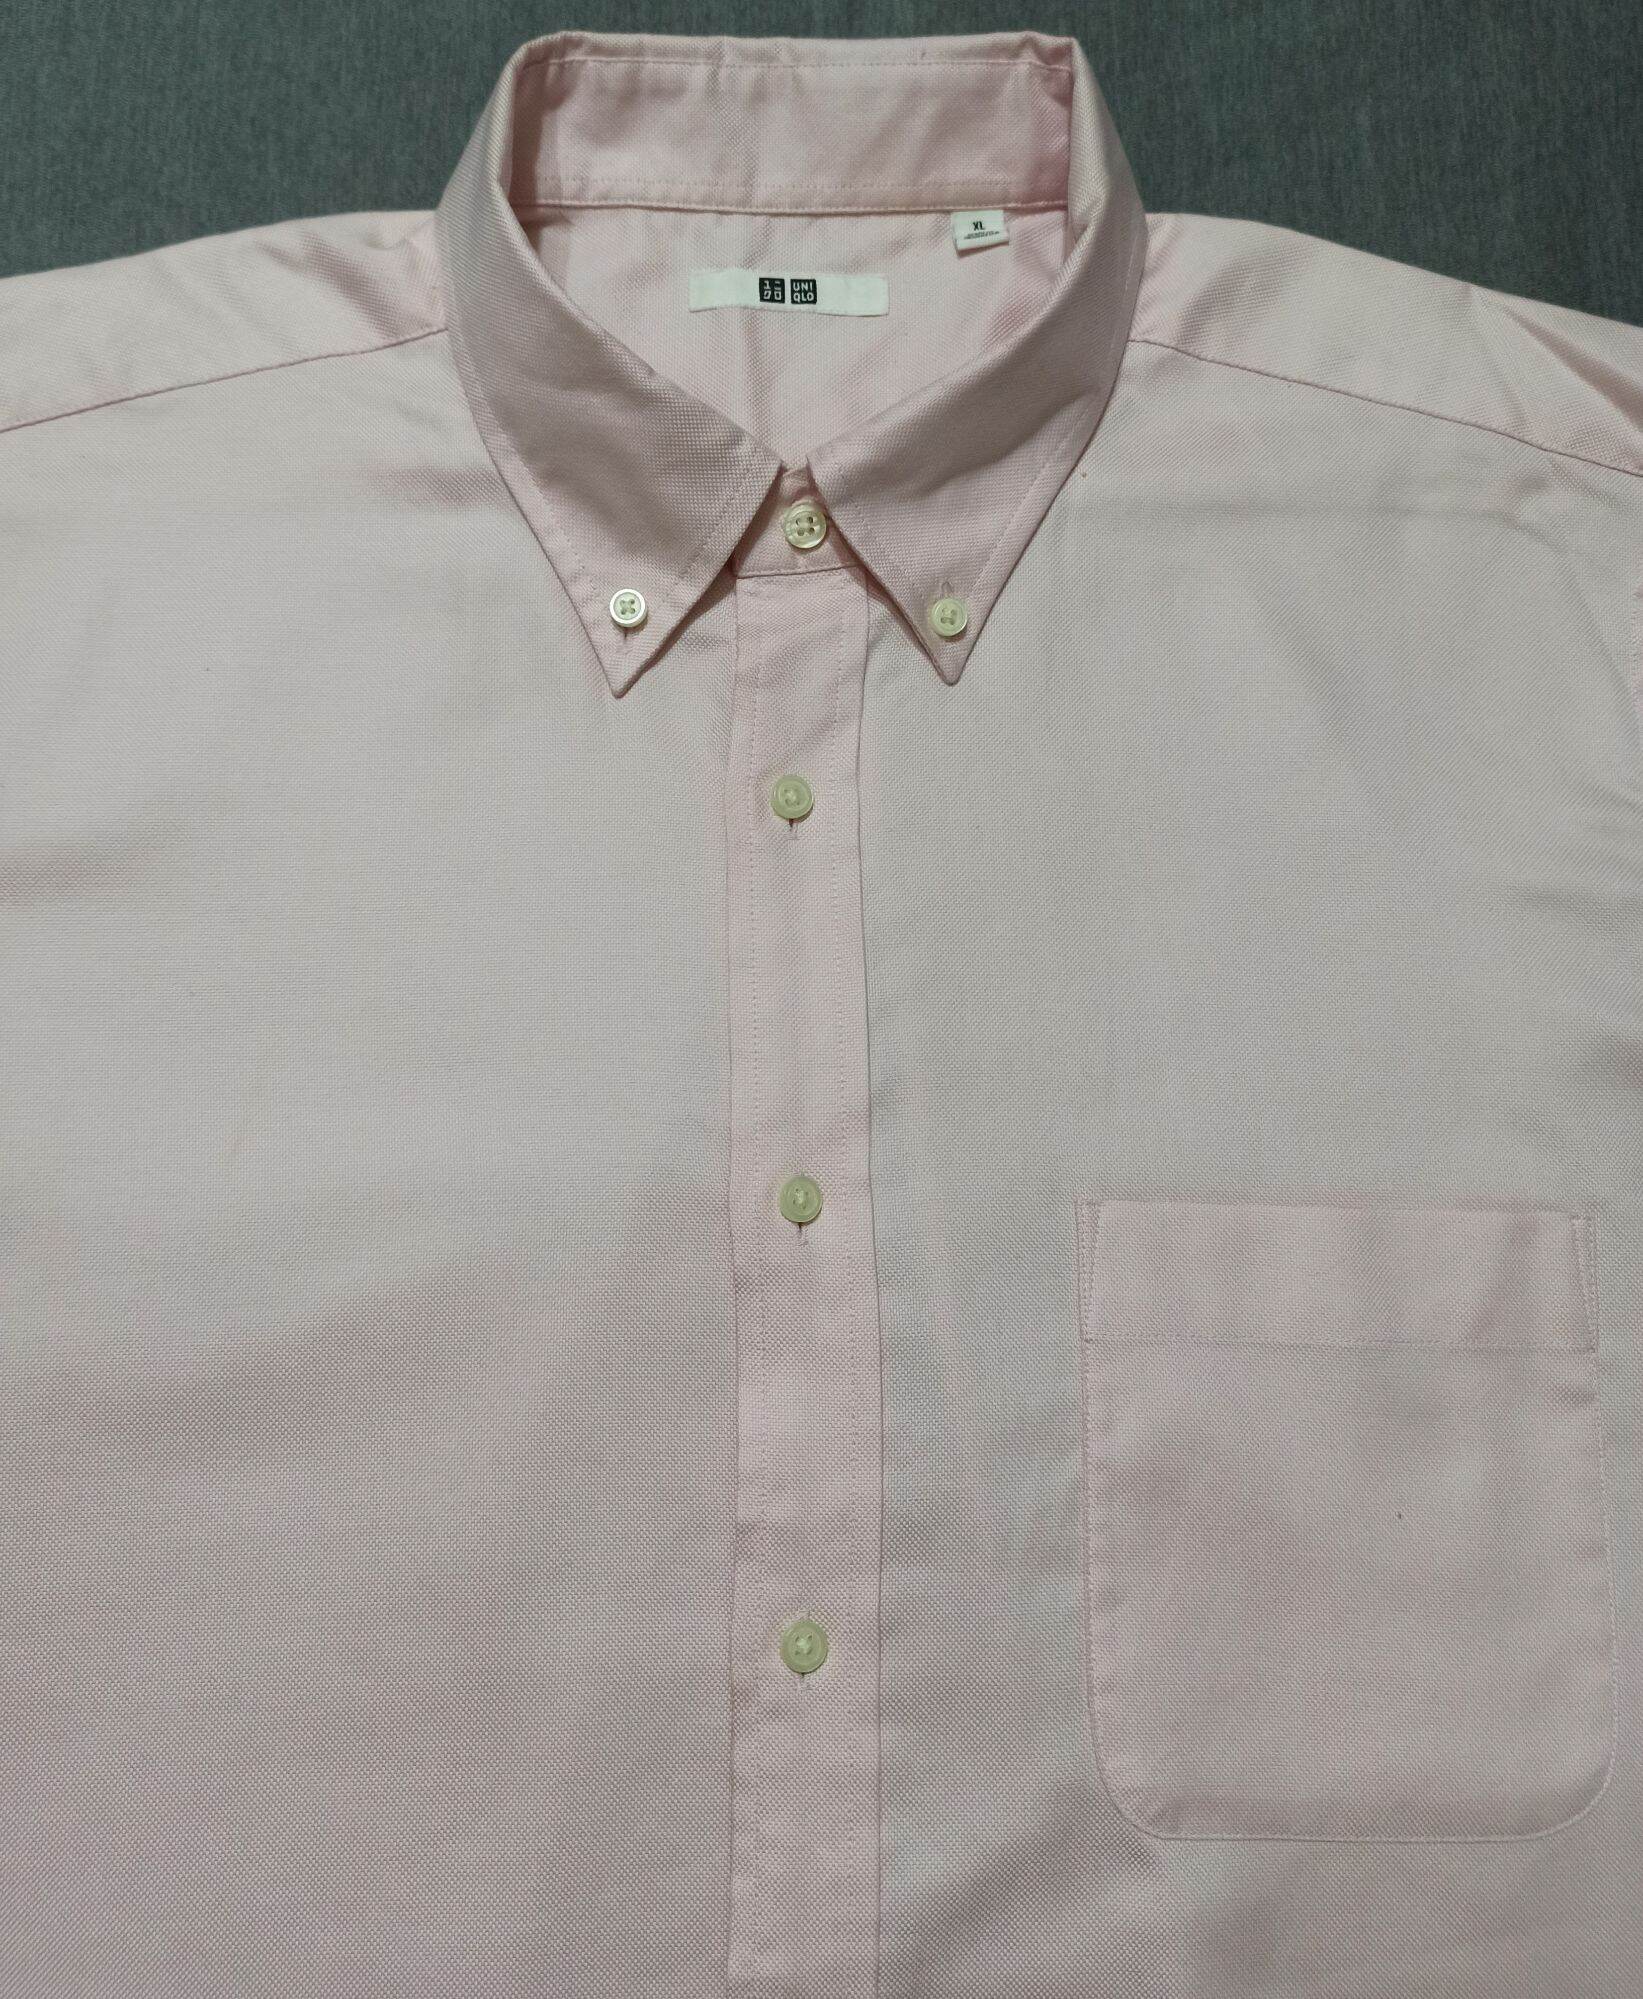 UNIQLO Olive Green Button Down Long Sleeve Shirt Size L Mens Fashion  Tops  Sets Formal Shirts on Carousell